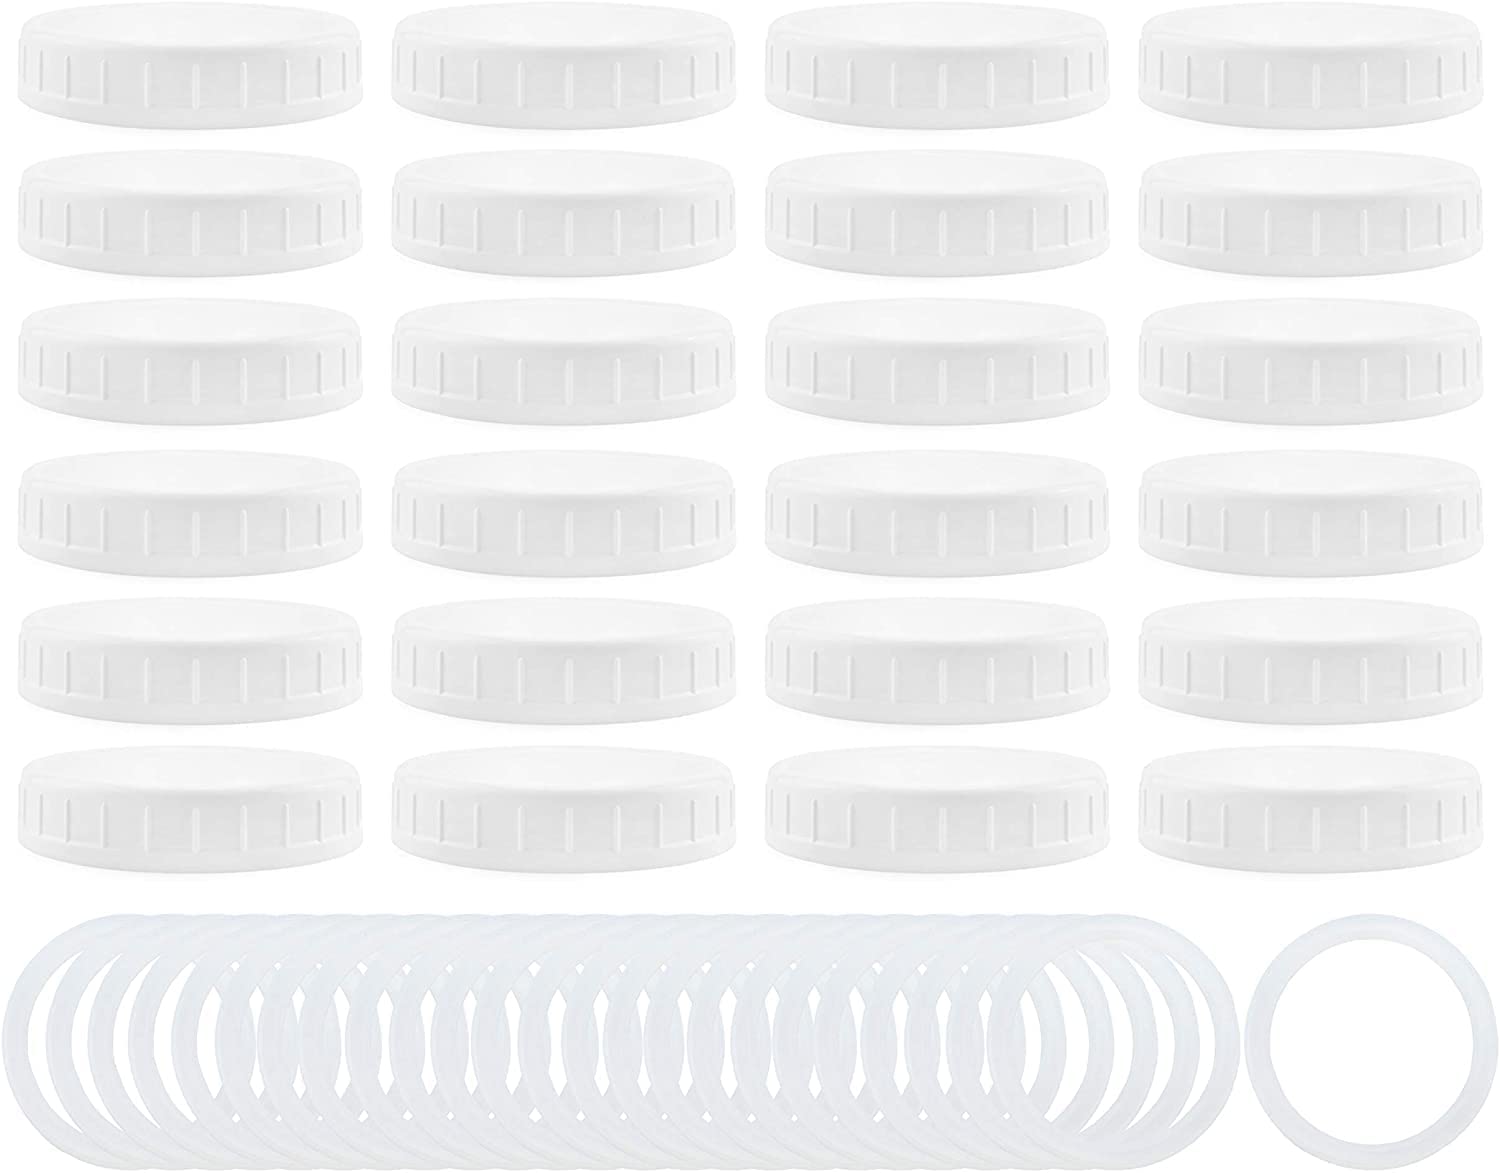 Cornucopia Wide Mouth Plastic Mason Jar Lids with Silicone Seal Rings (24-Pack Deluxe Set)